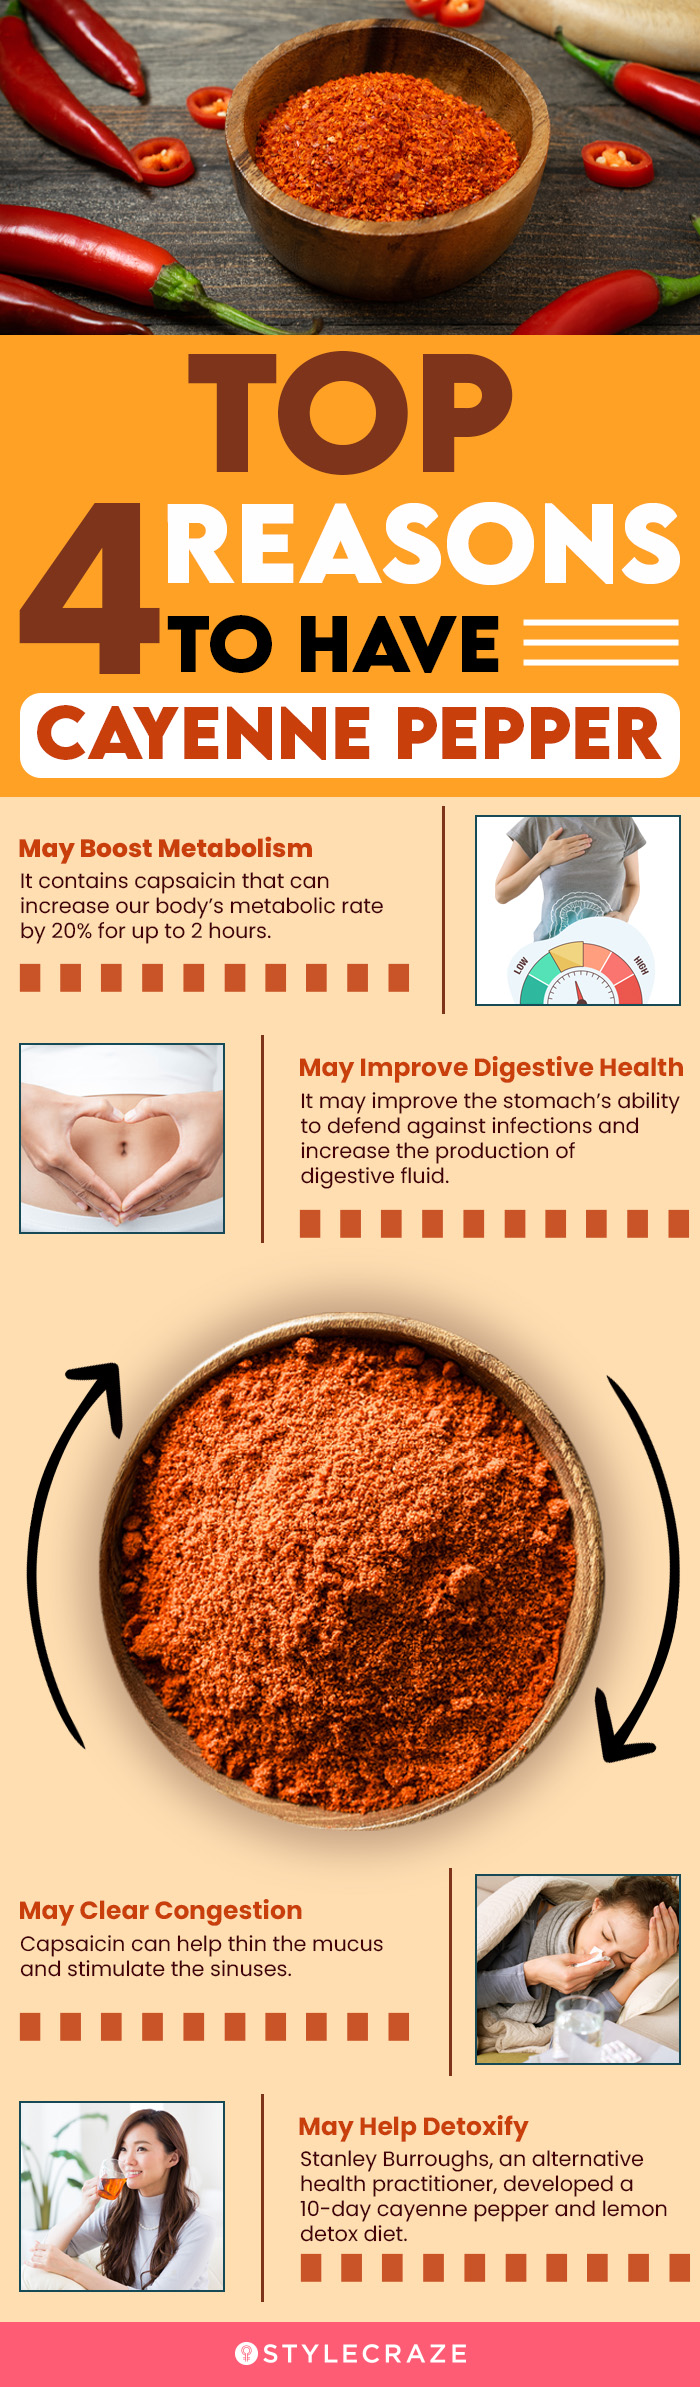 top 4 reasons to have cayenne pepper (infographic)